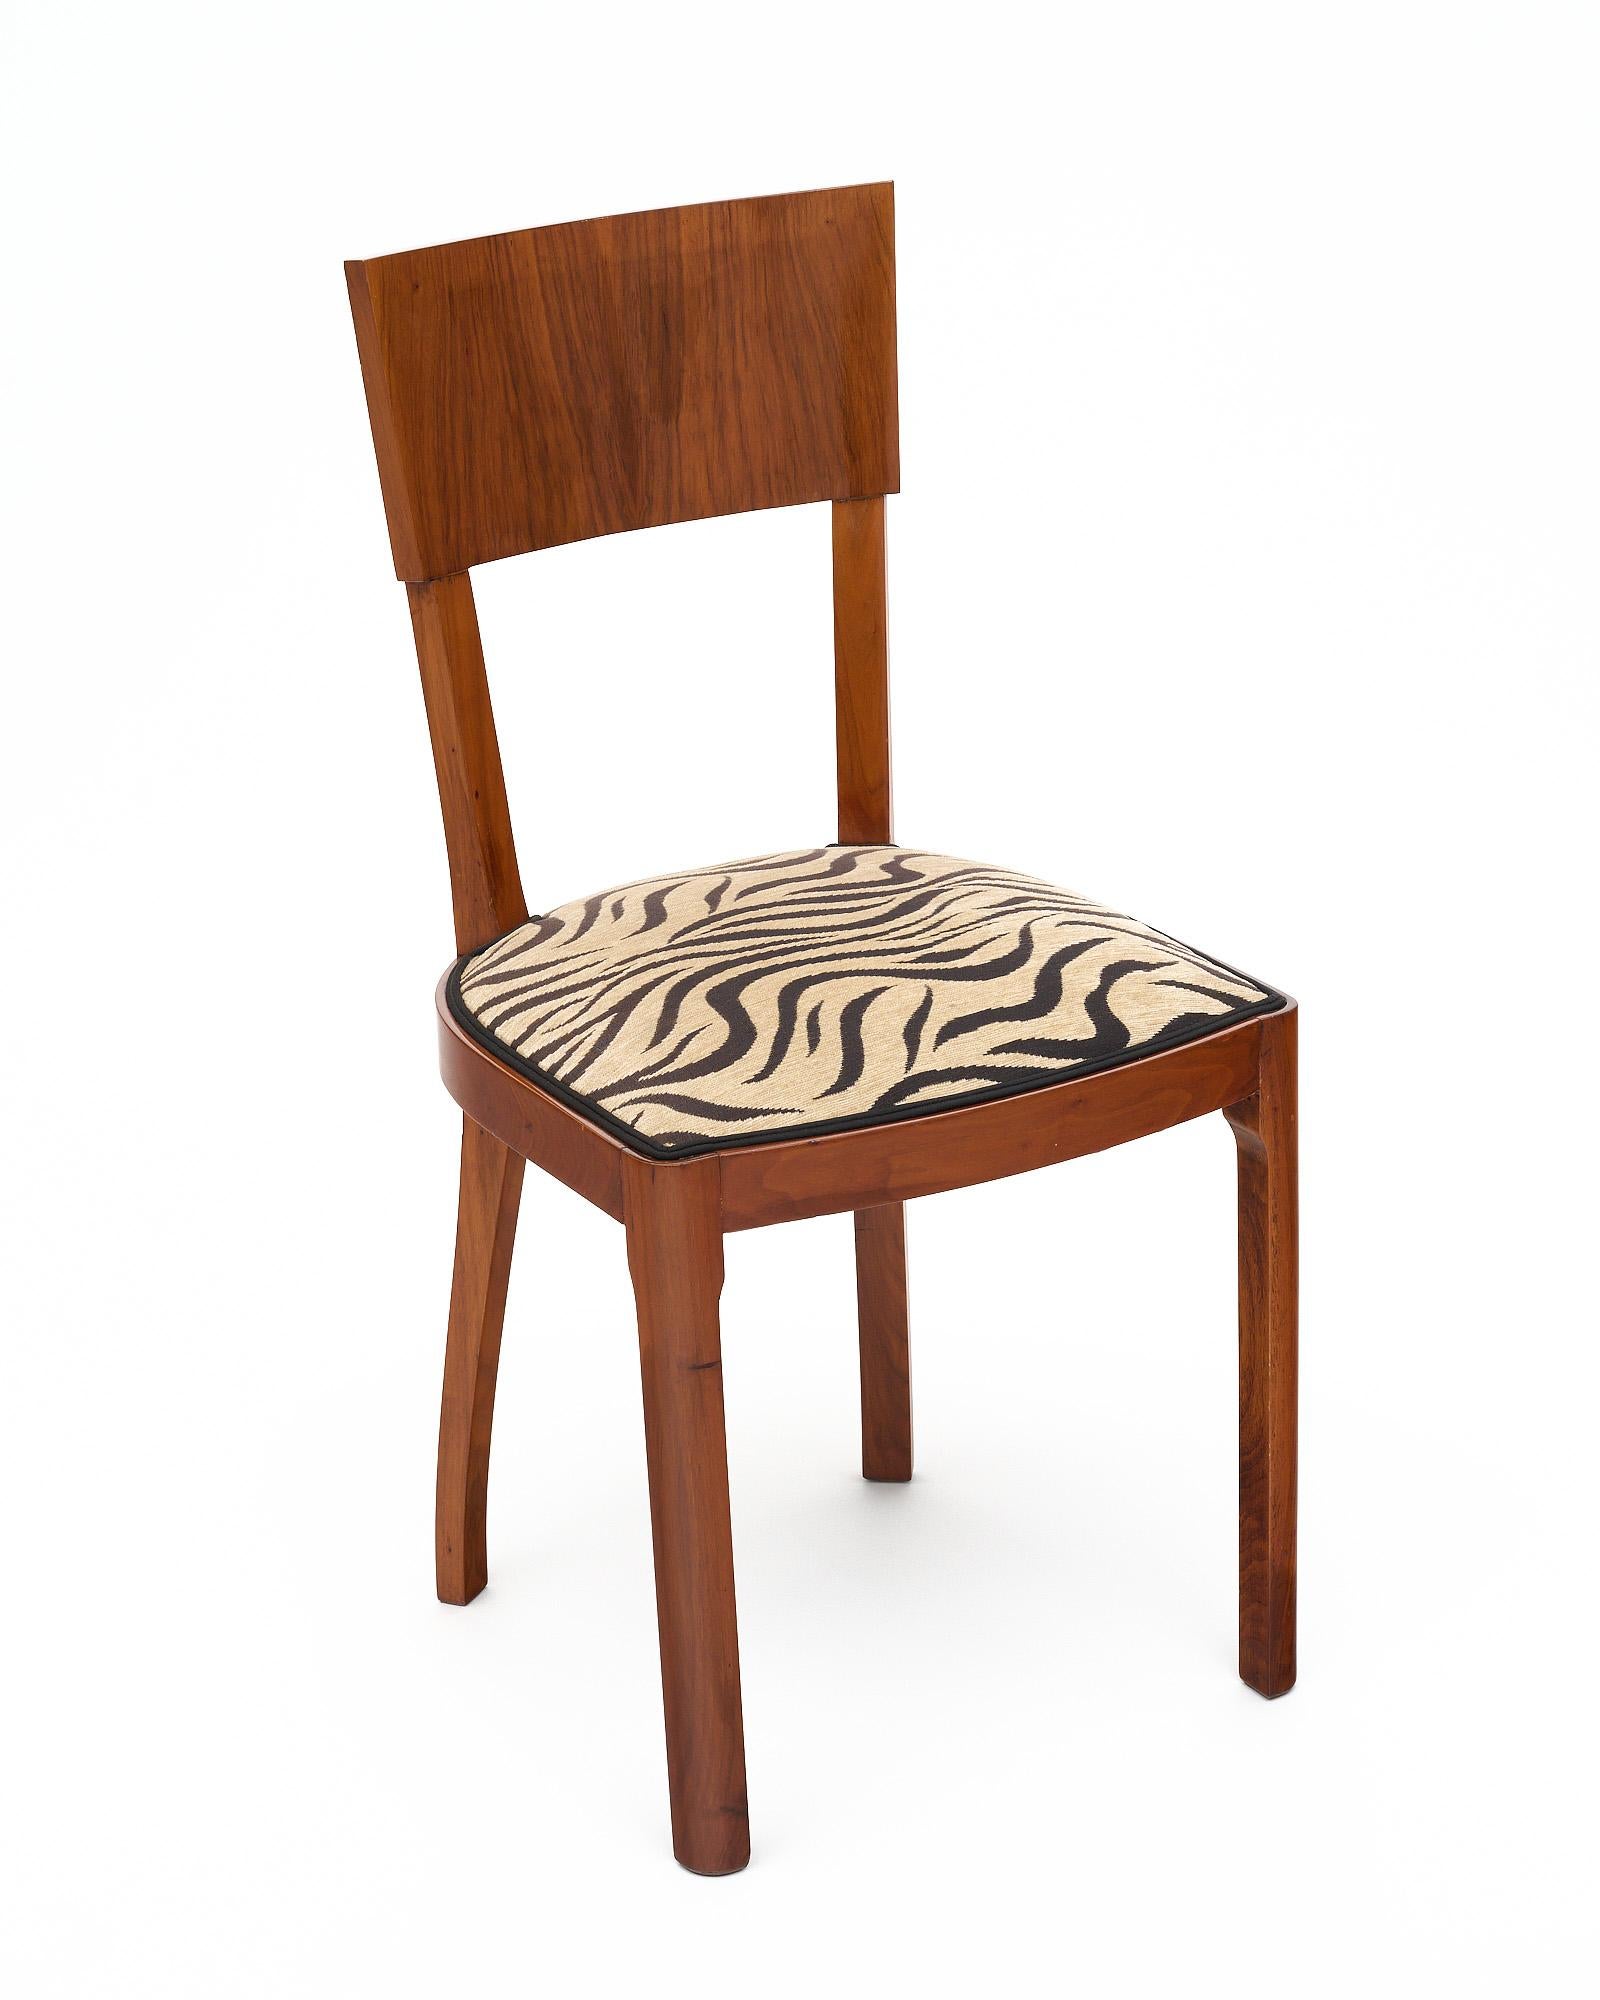 Set of six dining chairs from Austria; of solid walnut and figured walnut veneer. The chairs design features both the modern lines of Art Deco and the feel of Biedermeier  neoclassical designs. They are upholstered in the original zebra striped